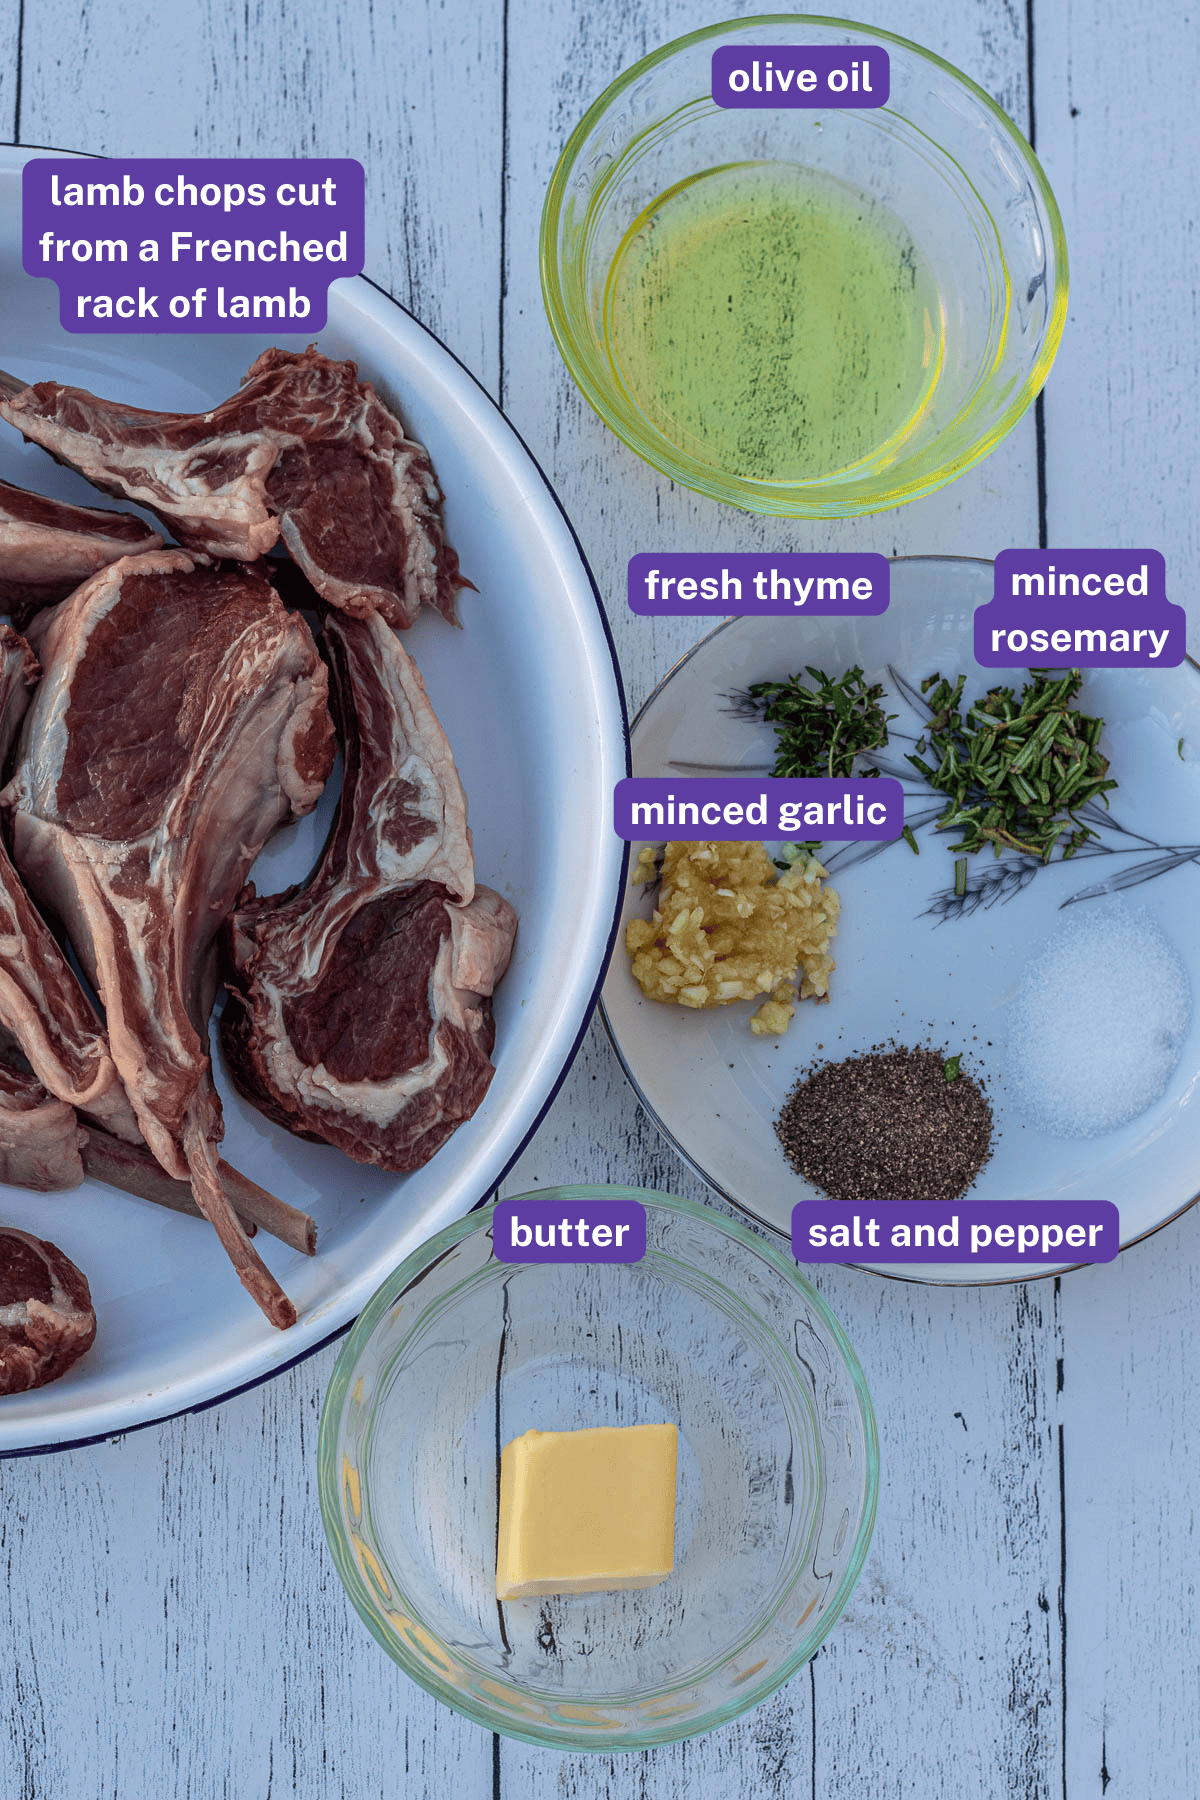 Labeled ingredients for pan seared lamb chops.